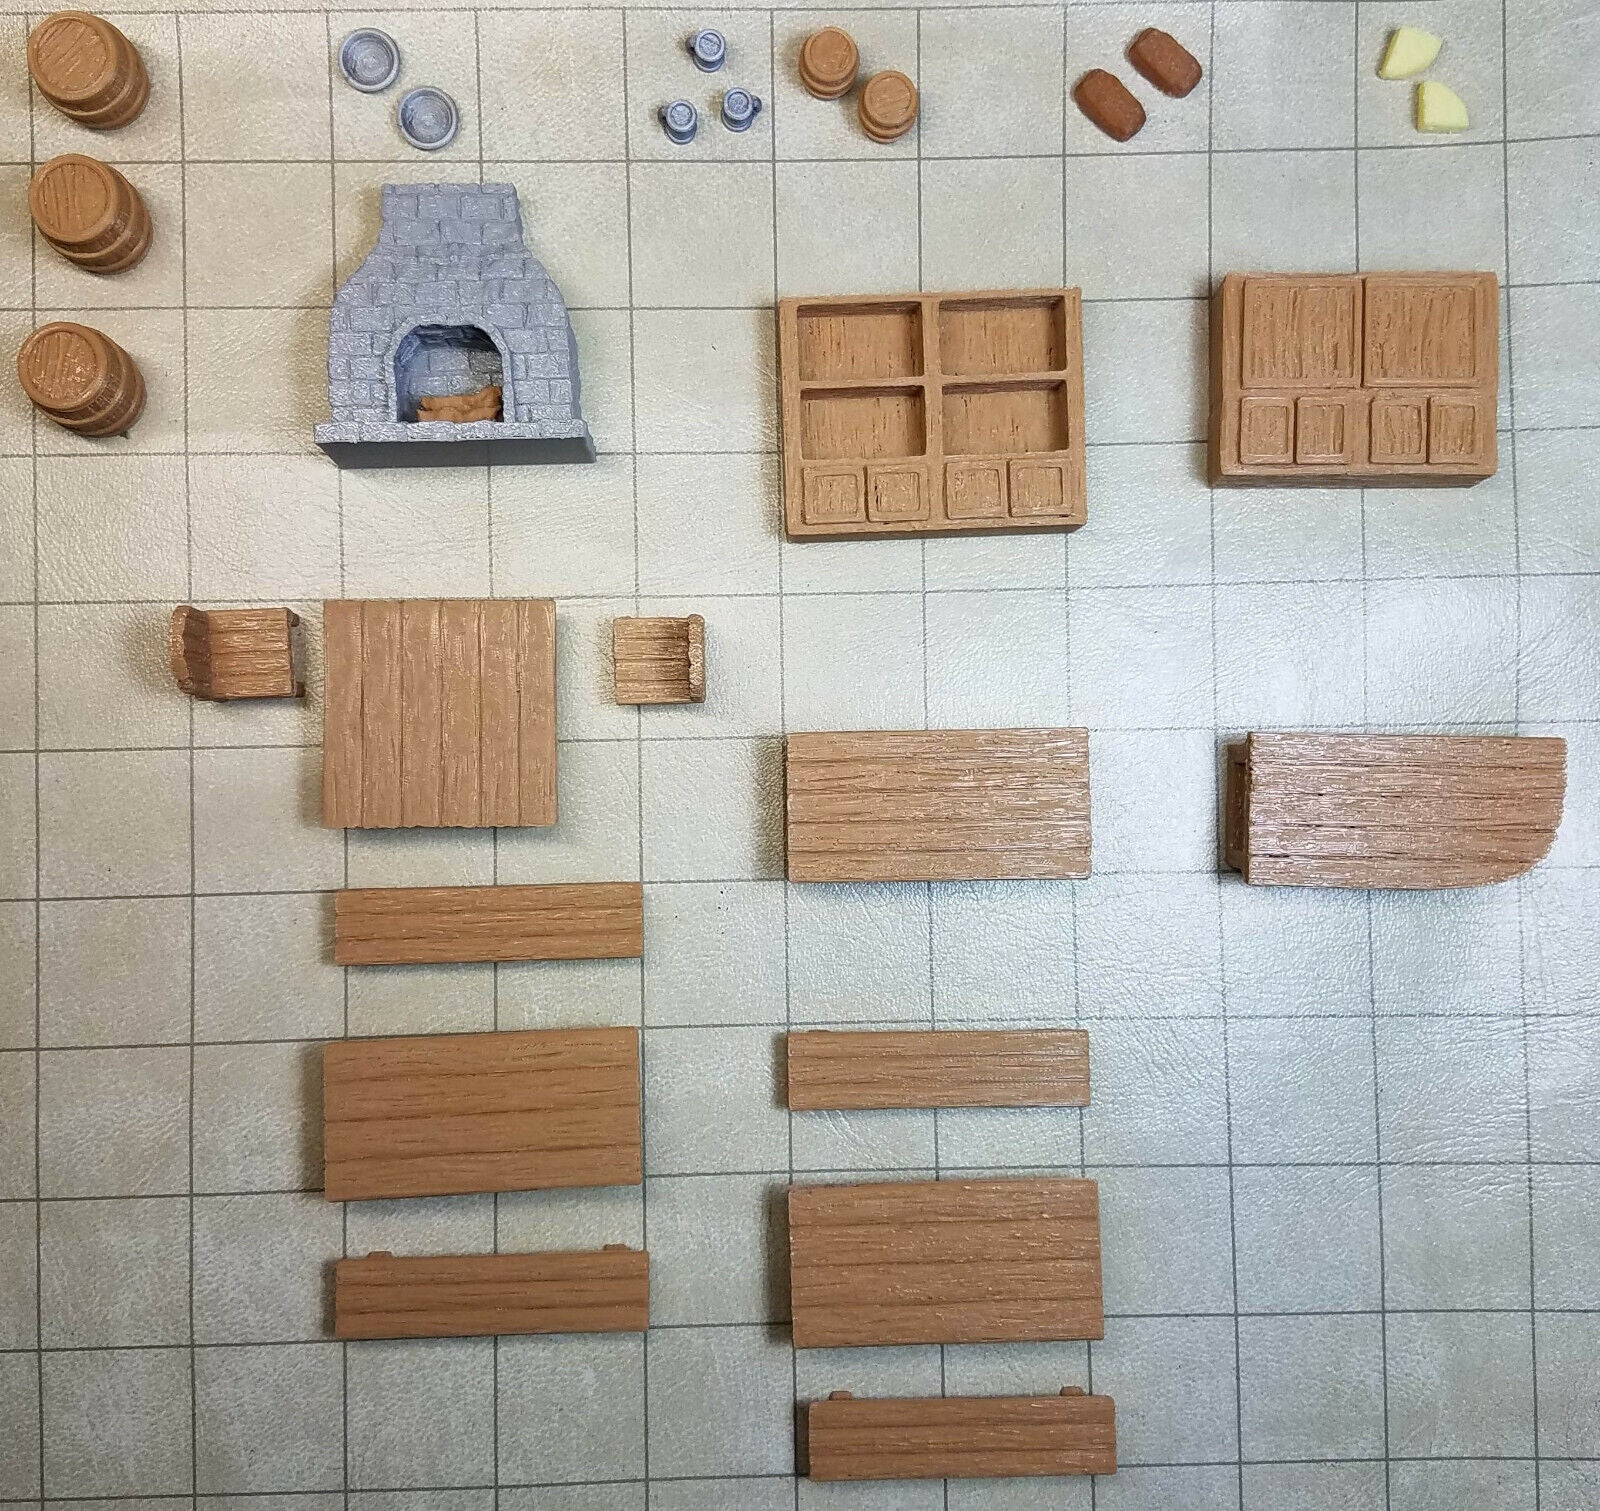 Custom 3d Printed Deluxe Tavern Set for 28mm Gaming this Terrain doesn't need painting required. Designed for Tabletop Dungeon and Dragons Gaming